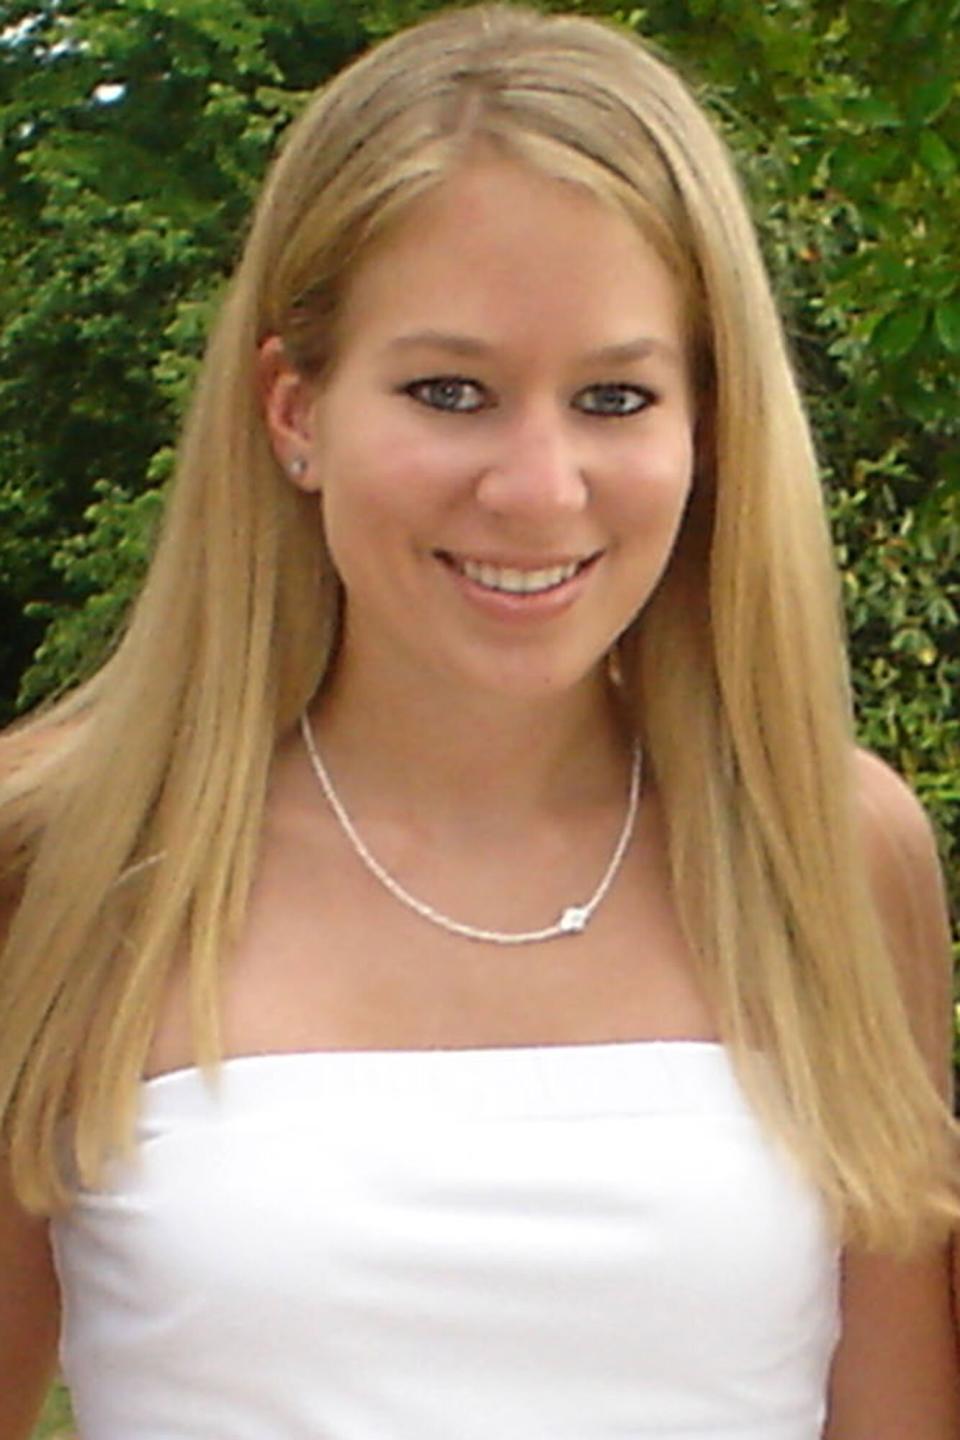 Natalee Holloway: Years-Old Aruba Mystery with Few Answers and No Body